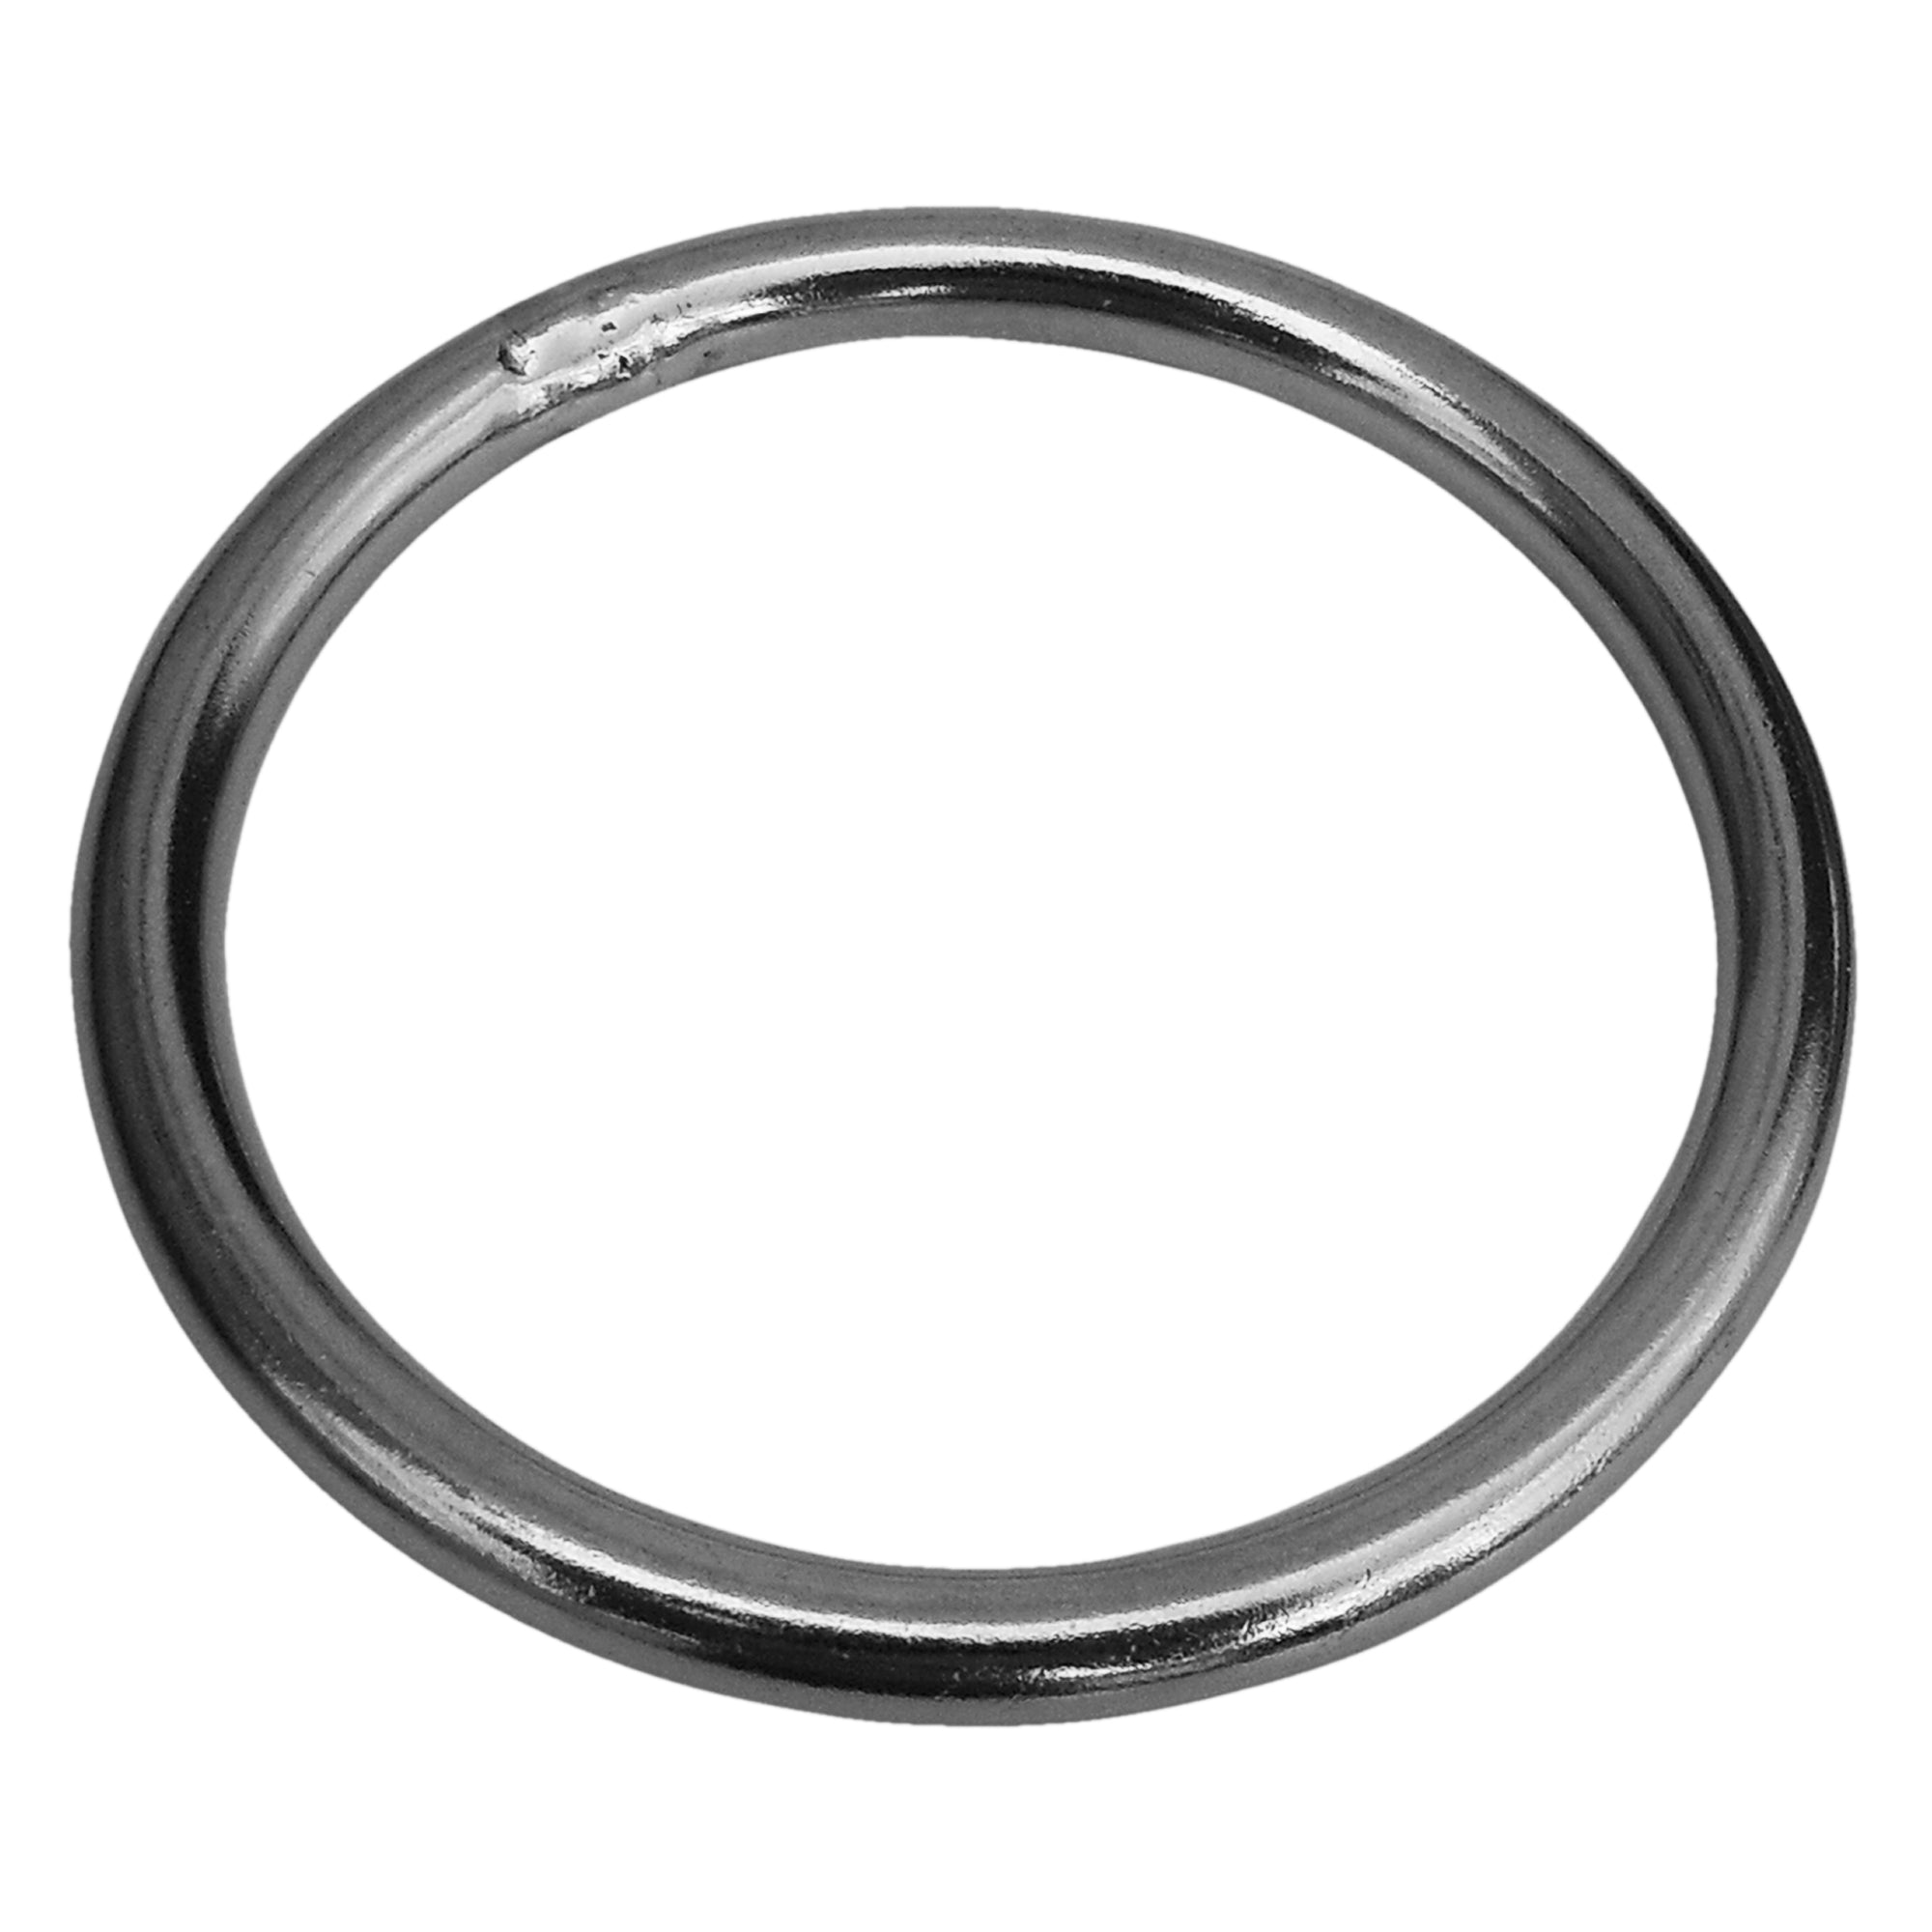 Round Ring Welded 1/8-Inch x 1-Inch - 4-Pack - FO2732-M4